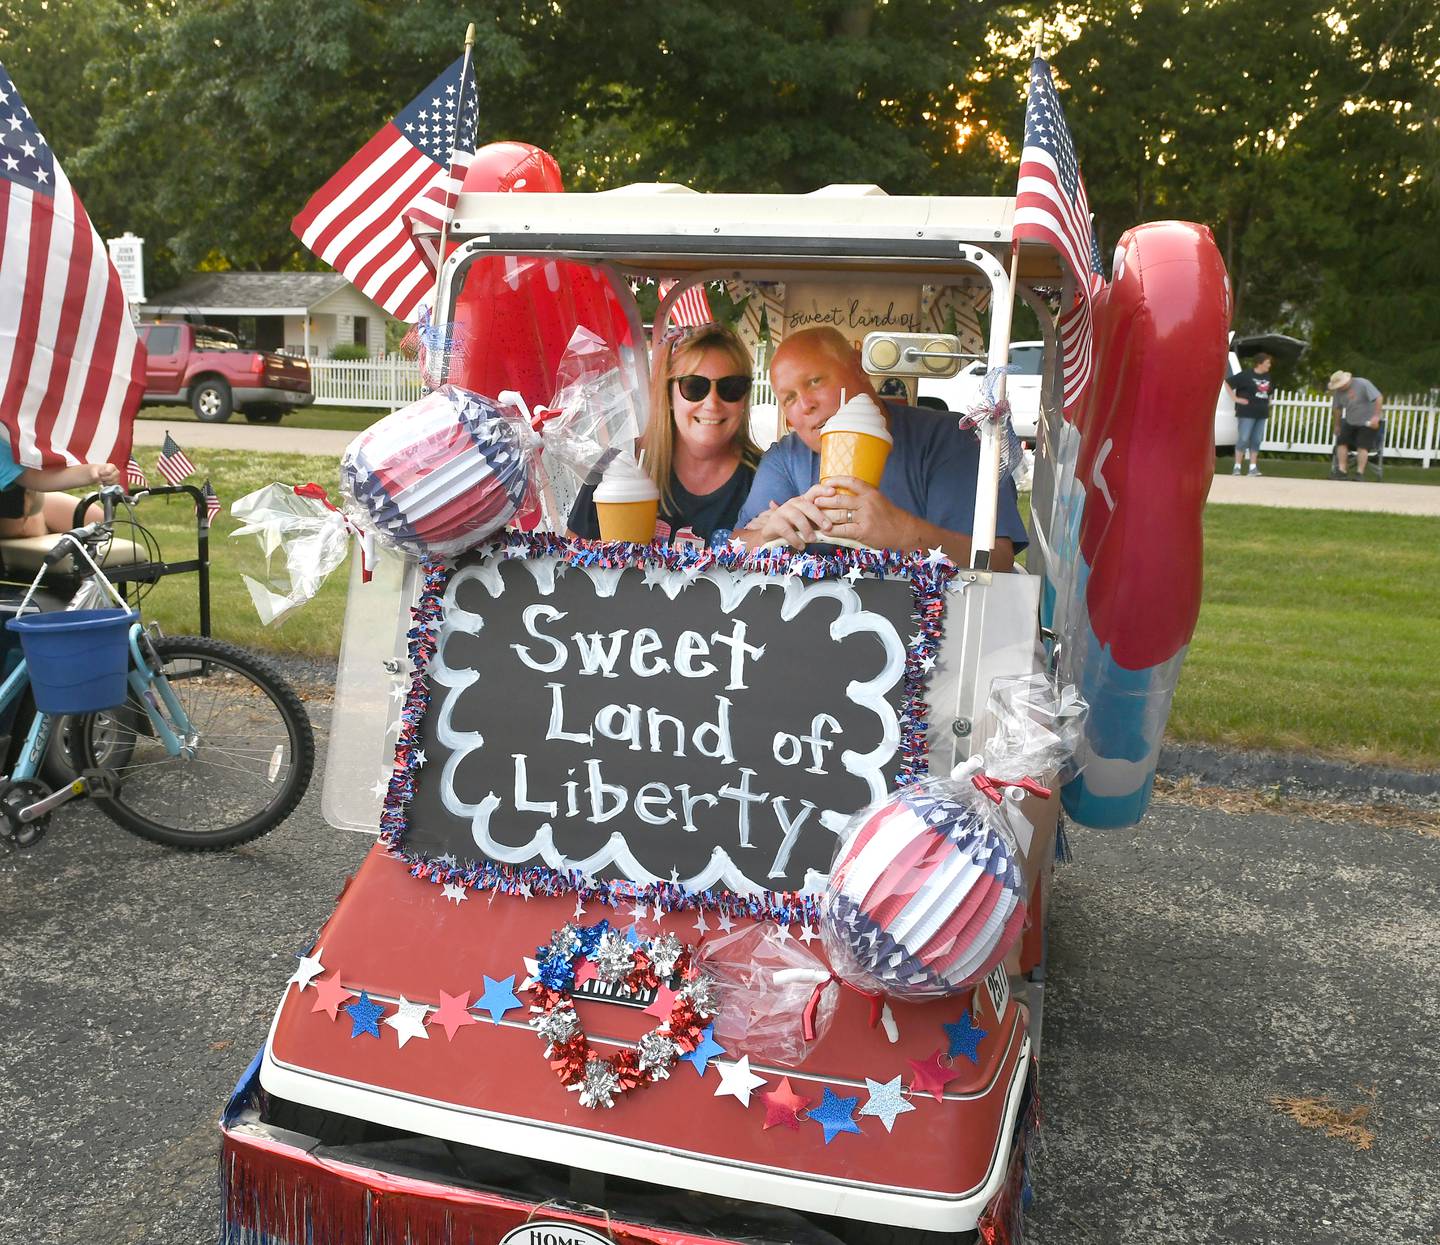 Mark and Linda Downey decorated their golf cart as the "Sweet Land of Liberty" for the Grand Detour Golf Cart Parade on July 3.